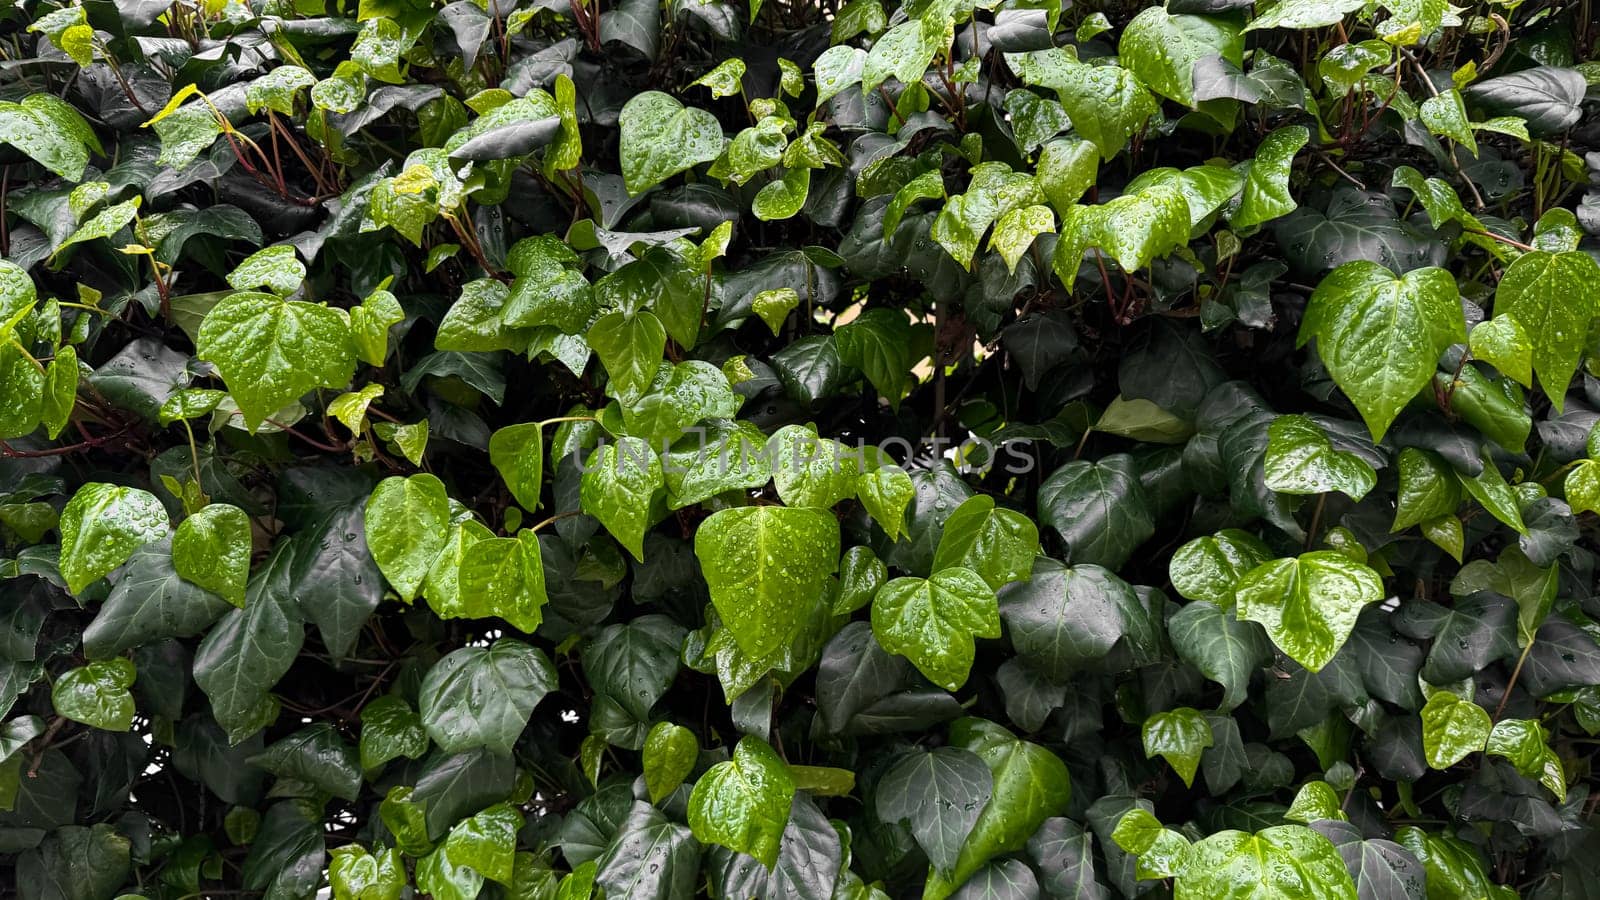 Lush green ivy leaves with raindrops, dense foliage after rain. Hydrated plants and nature rejuvenation concept for design and print. Close up, natural background. High quality photo